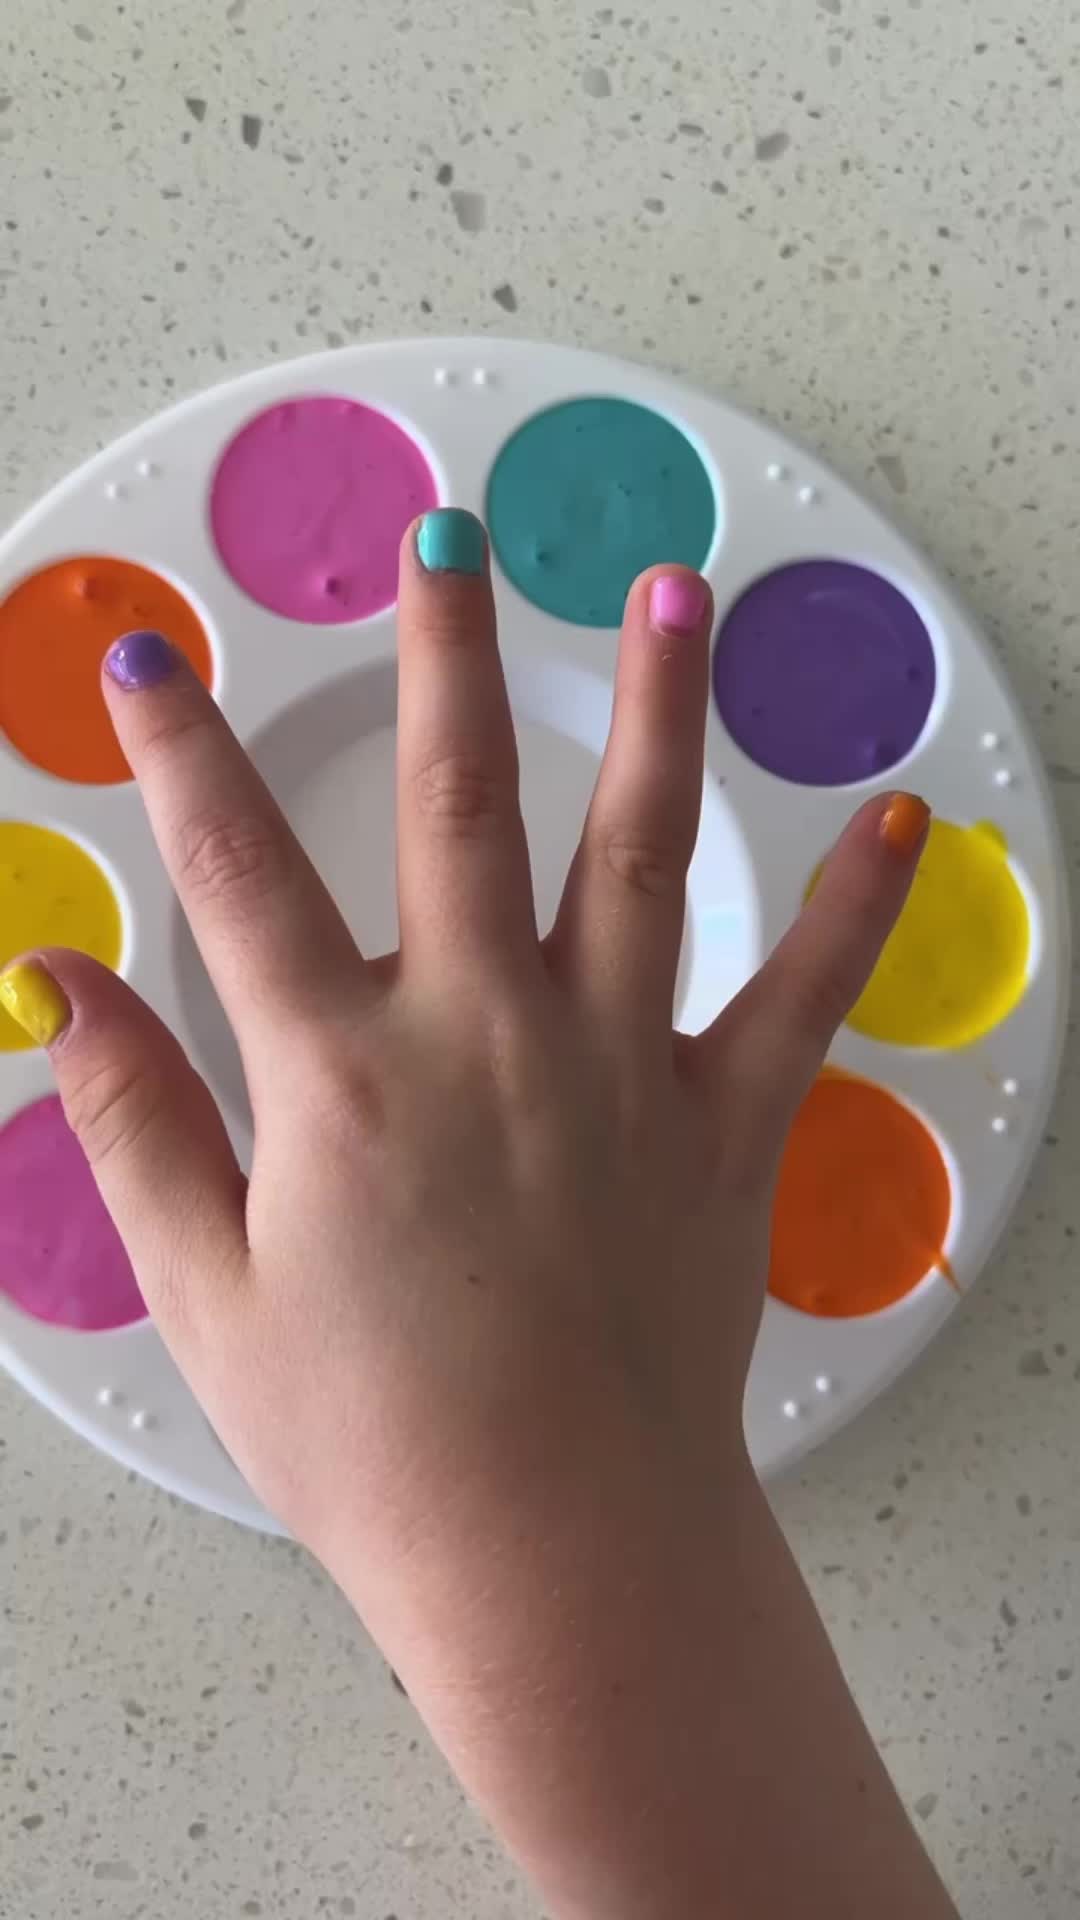 This may contain: a person's hand with multicolored nail polish sitting on top of a plate